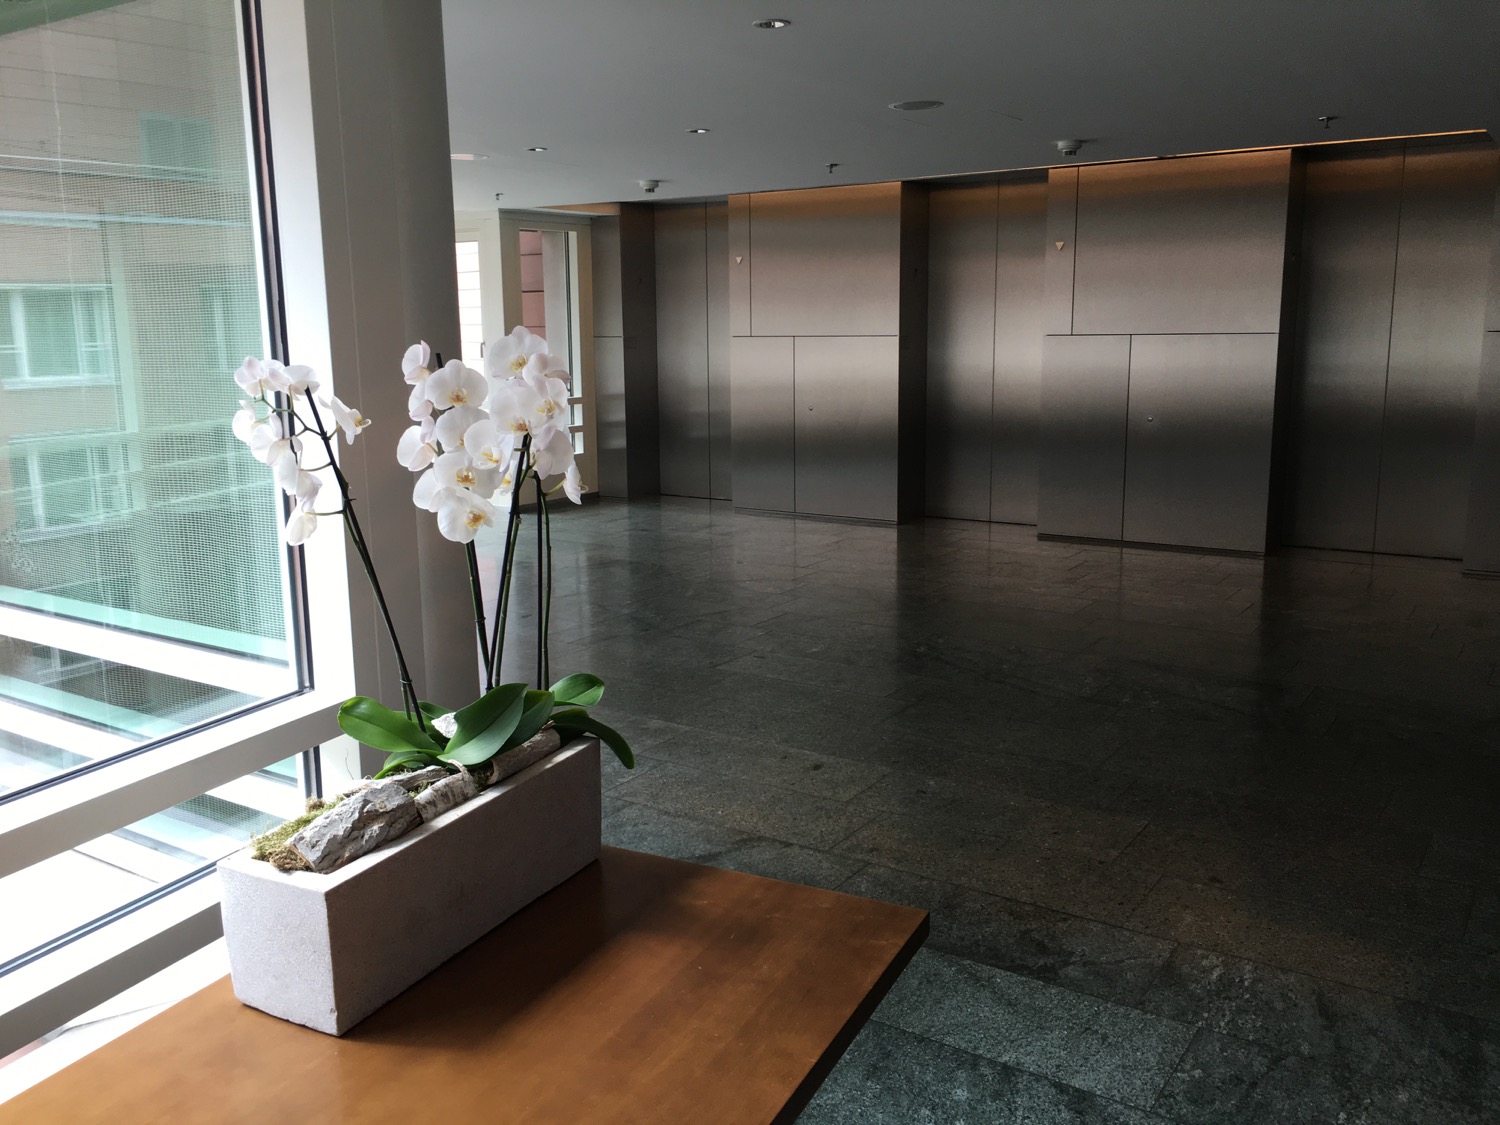 a planter with white flowers in a room with elevators